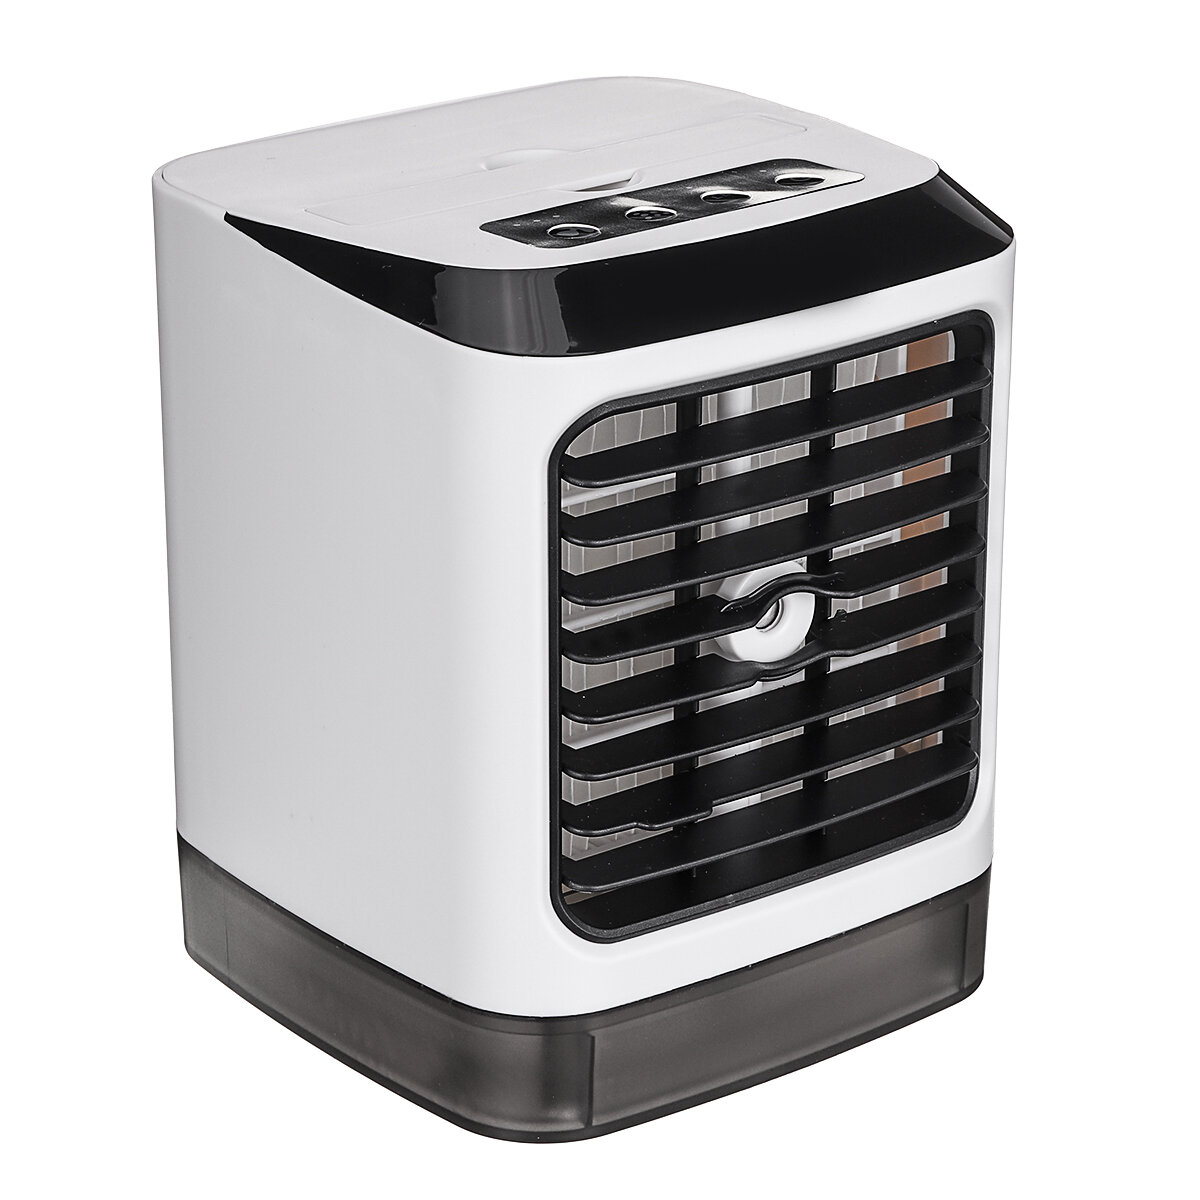 

5V Portable Mini Air Conditioner 3 Gears USB Charging Artic Cooler Cool Cooling Desktop Fan for Home Office